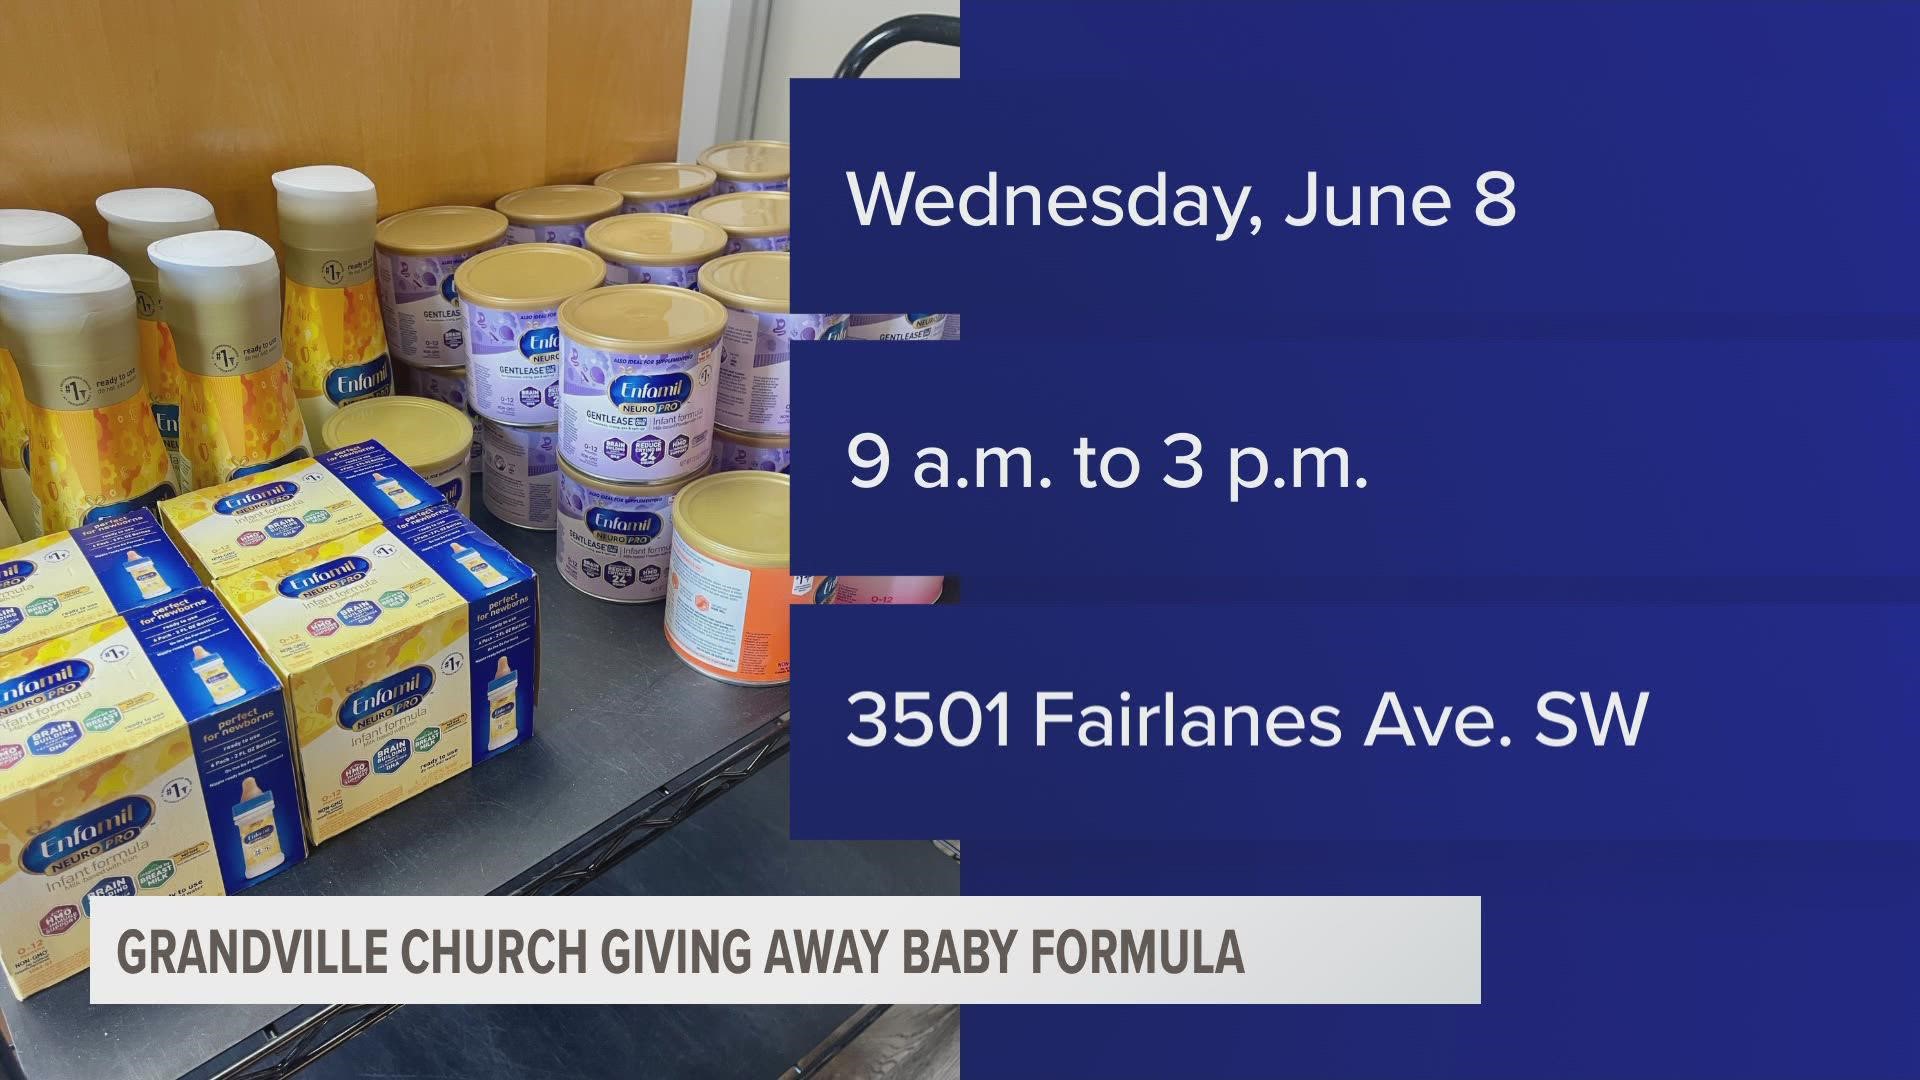 Mars Hill Bible Church will be giving away a limited supply of formula Wednesday after receiving donations from community members.